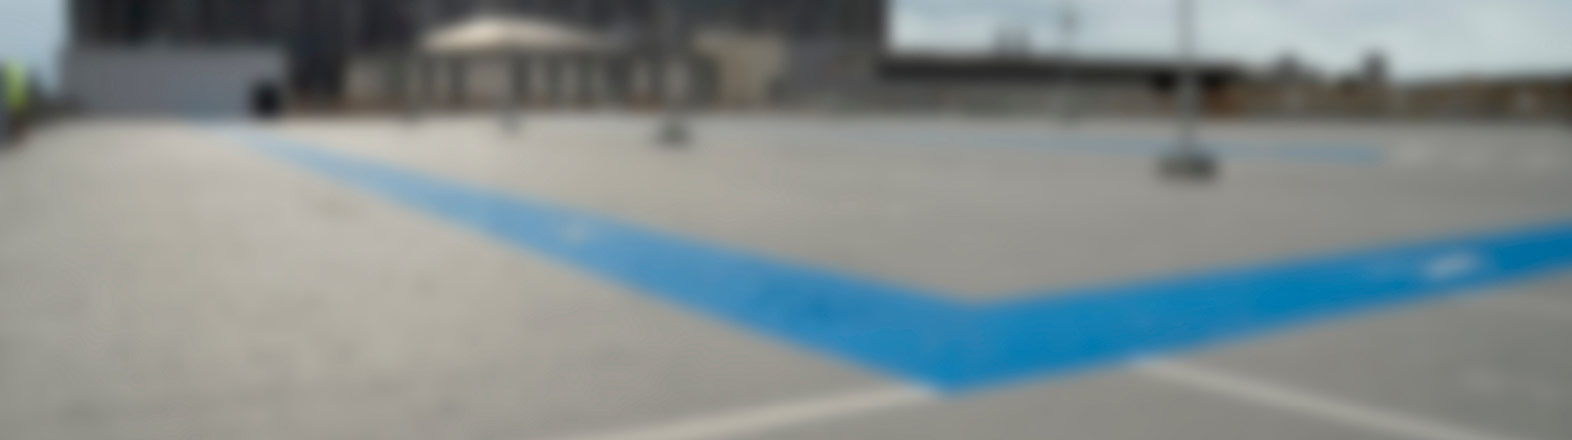 An Interactive Guide
to Car Park Deck
Coating Materials